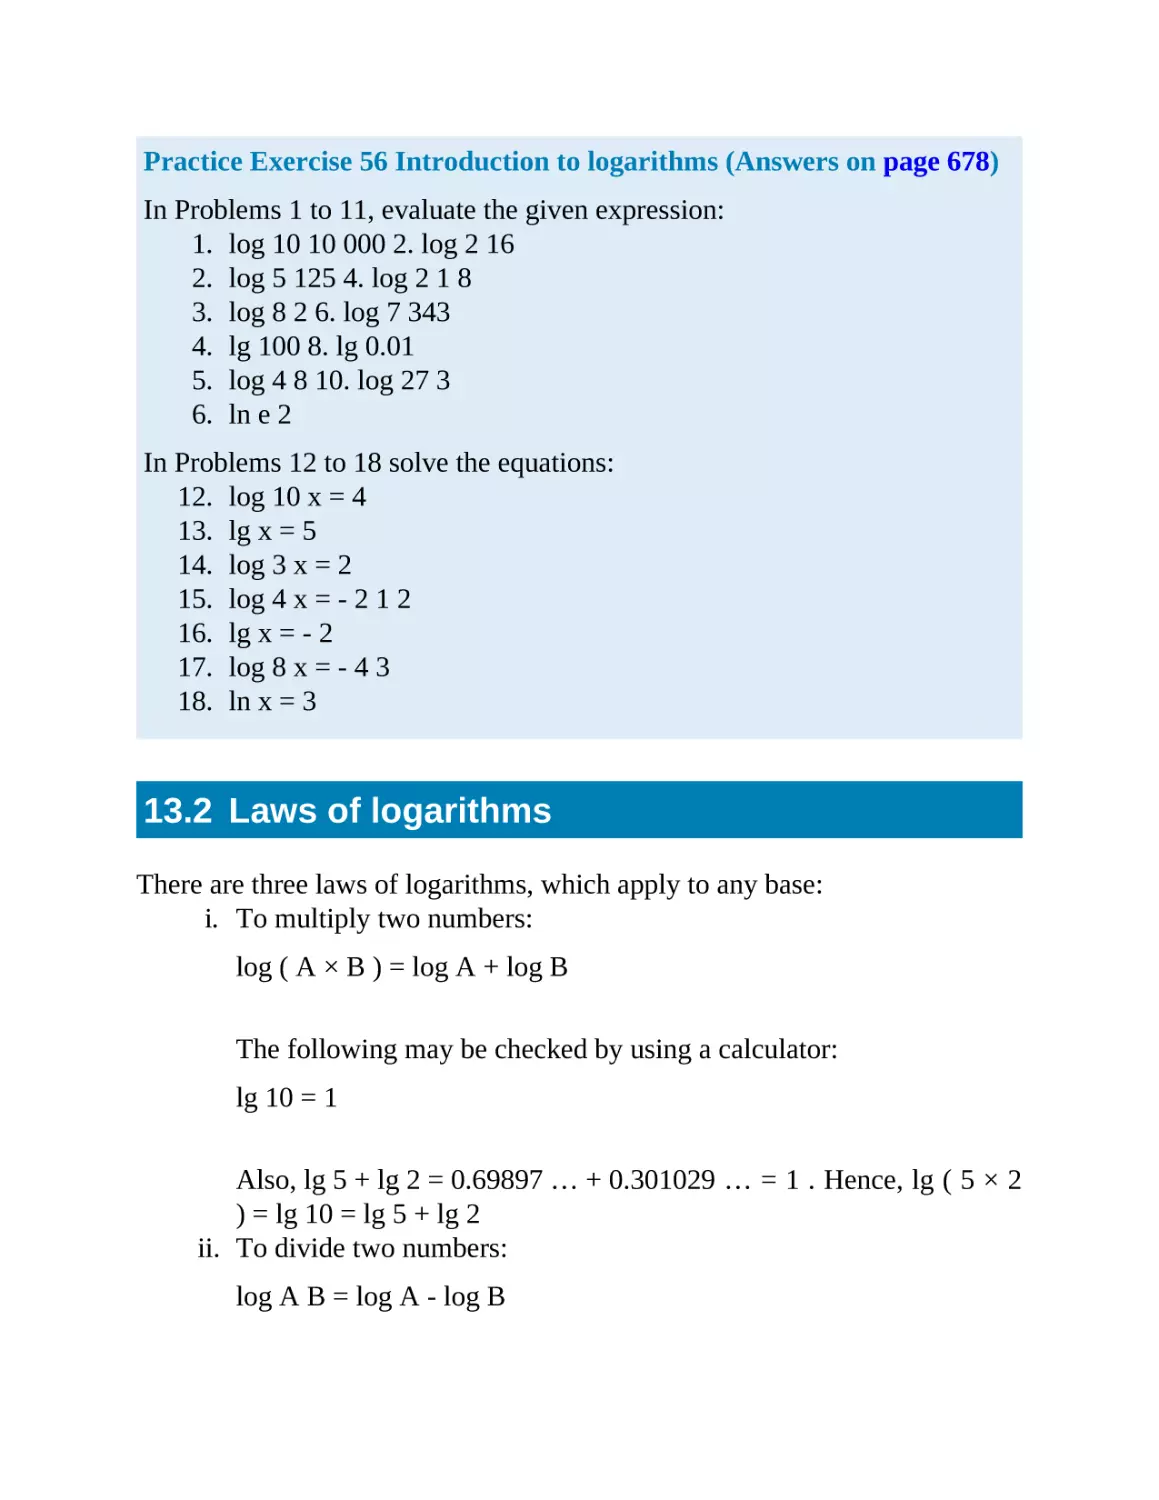 13.2 Laws of logarithms